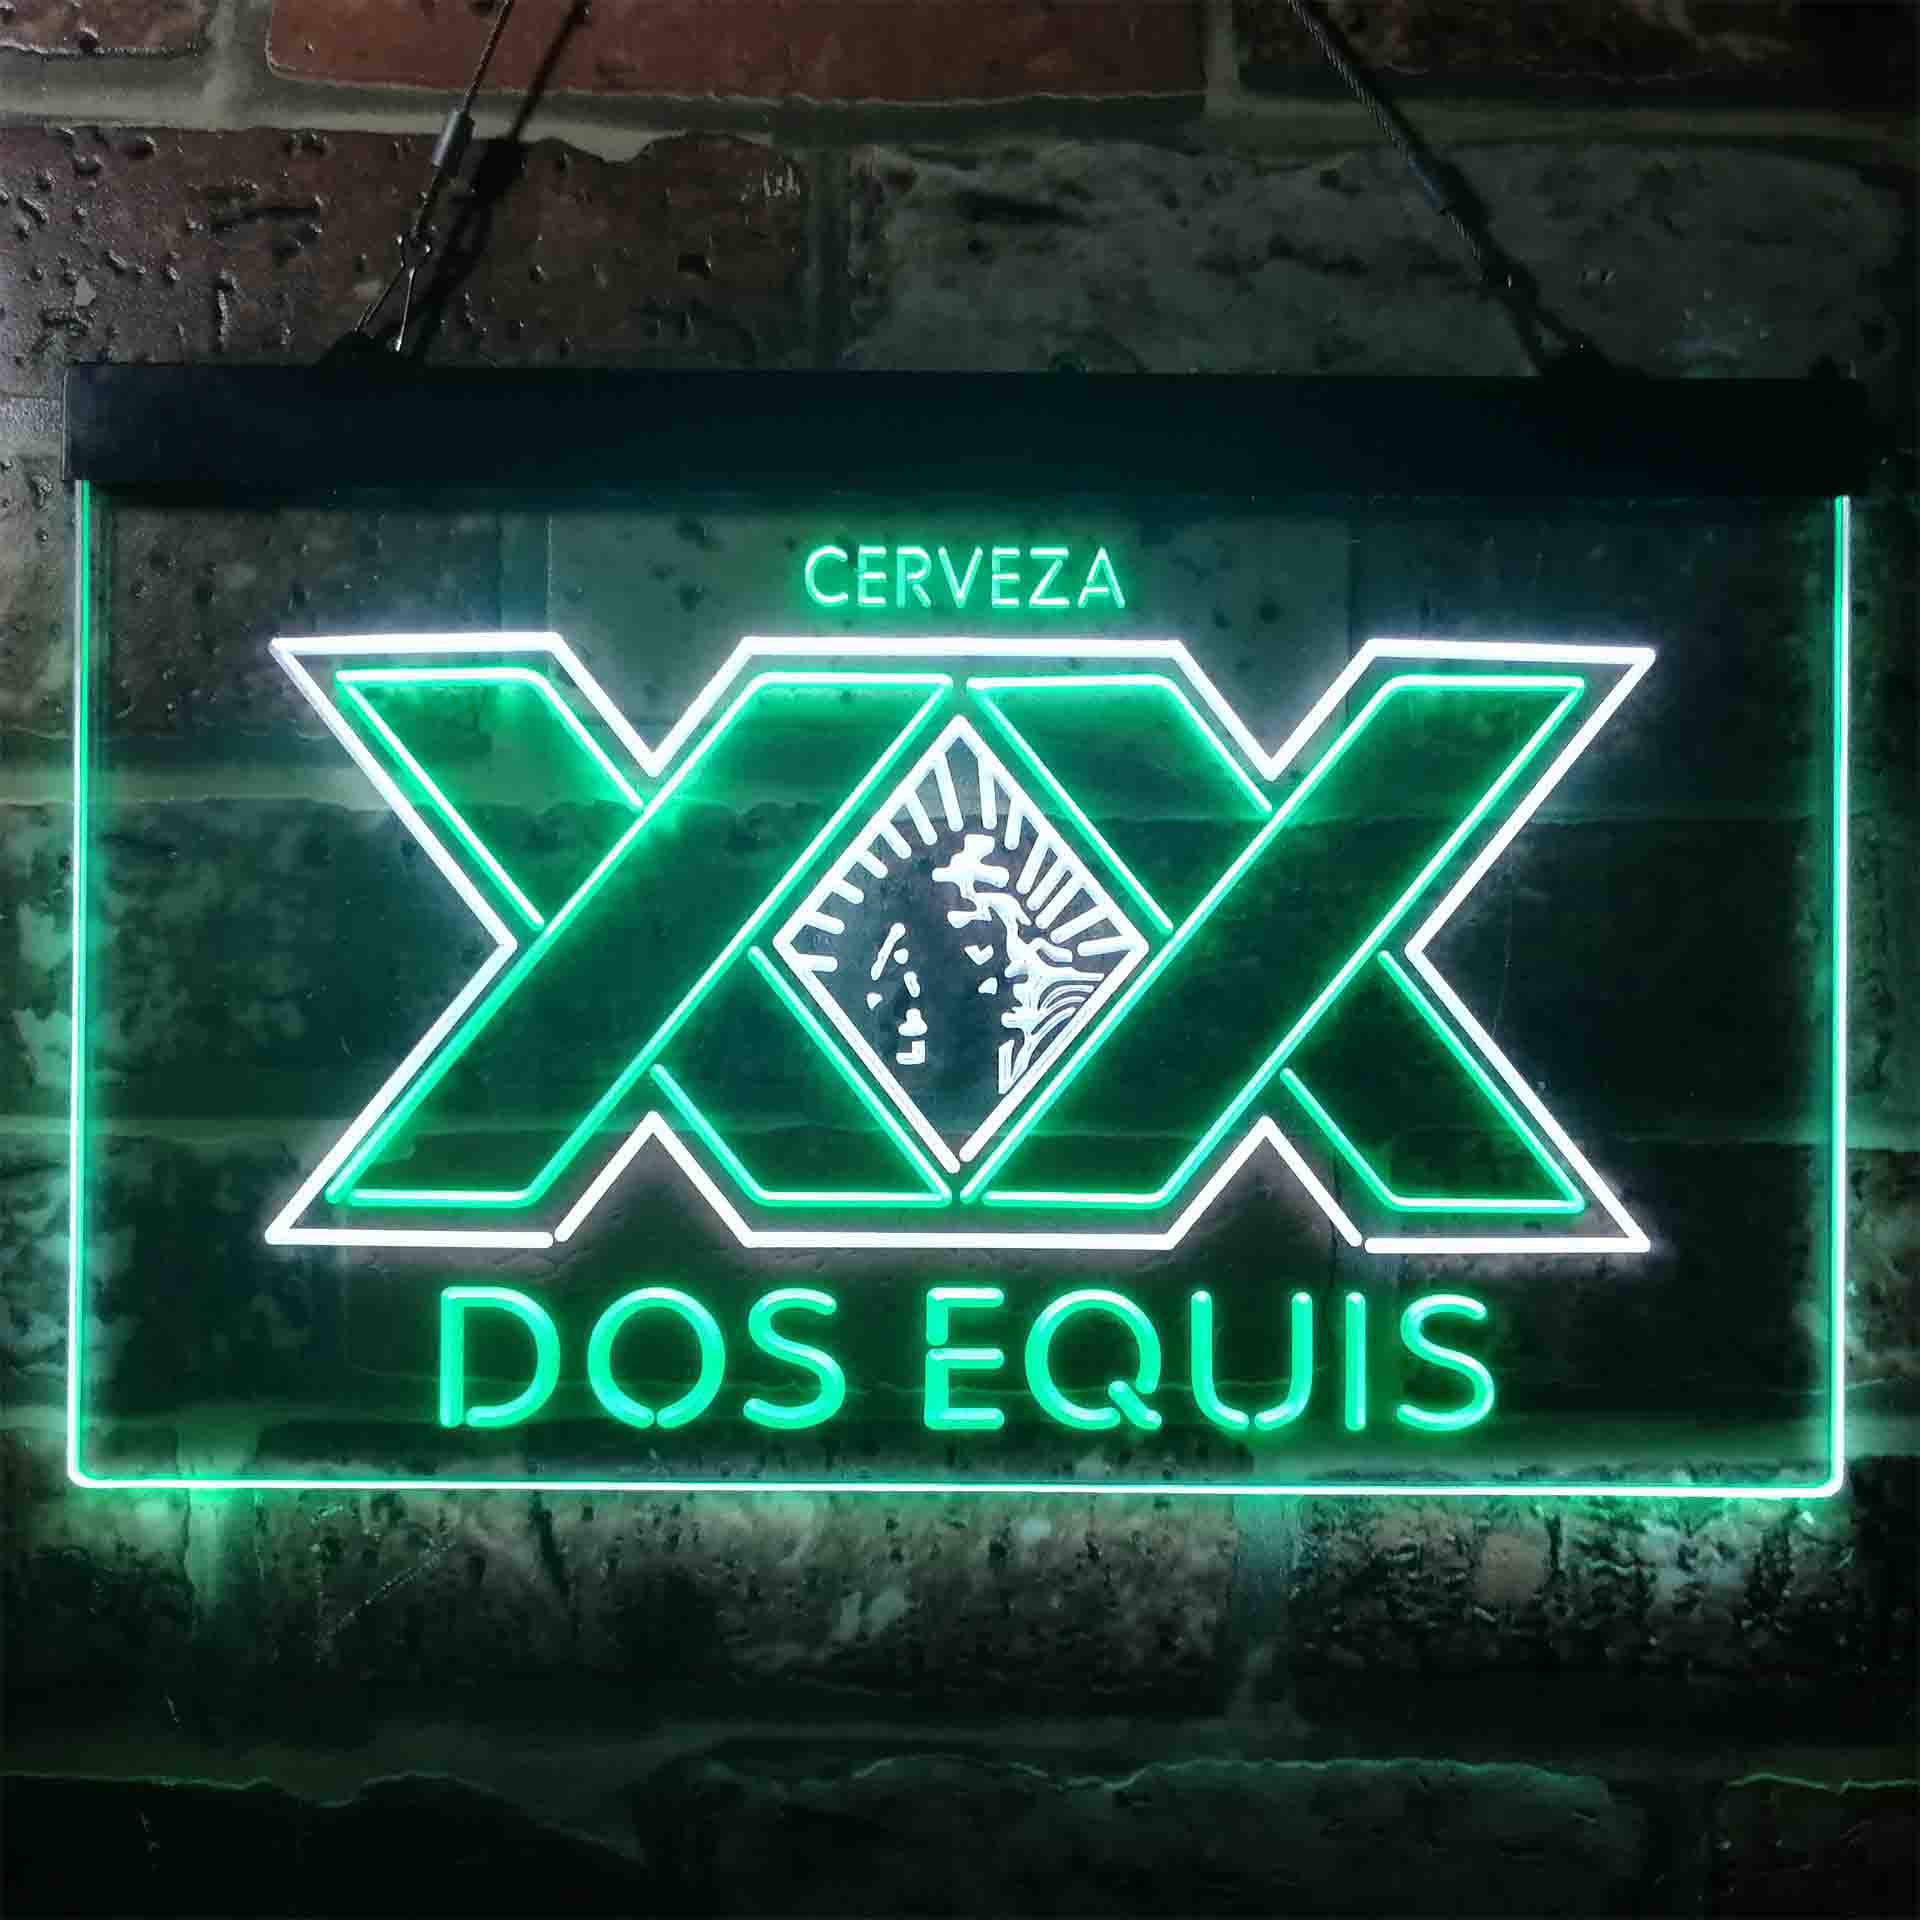 XX Dos Equis Beer Neon-Like LED Sign